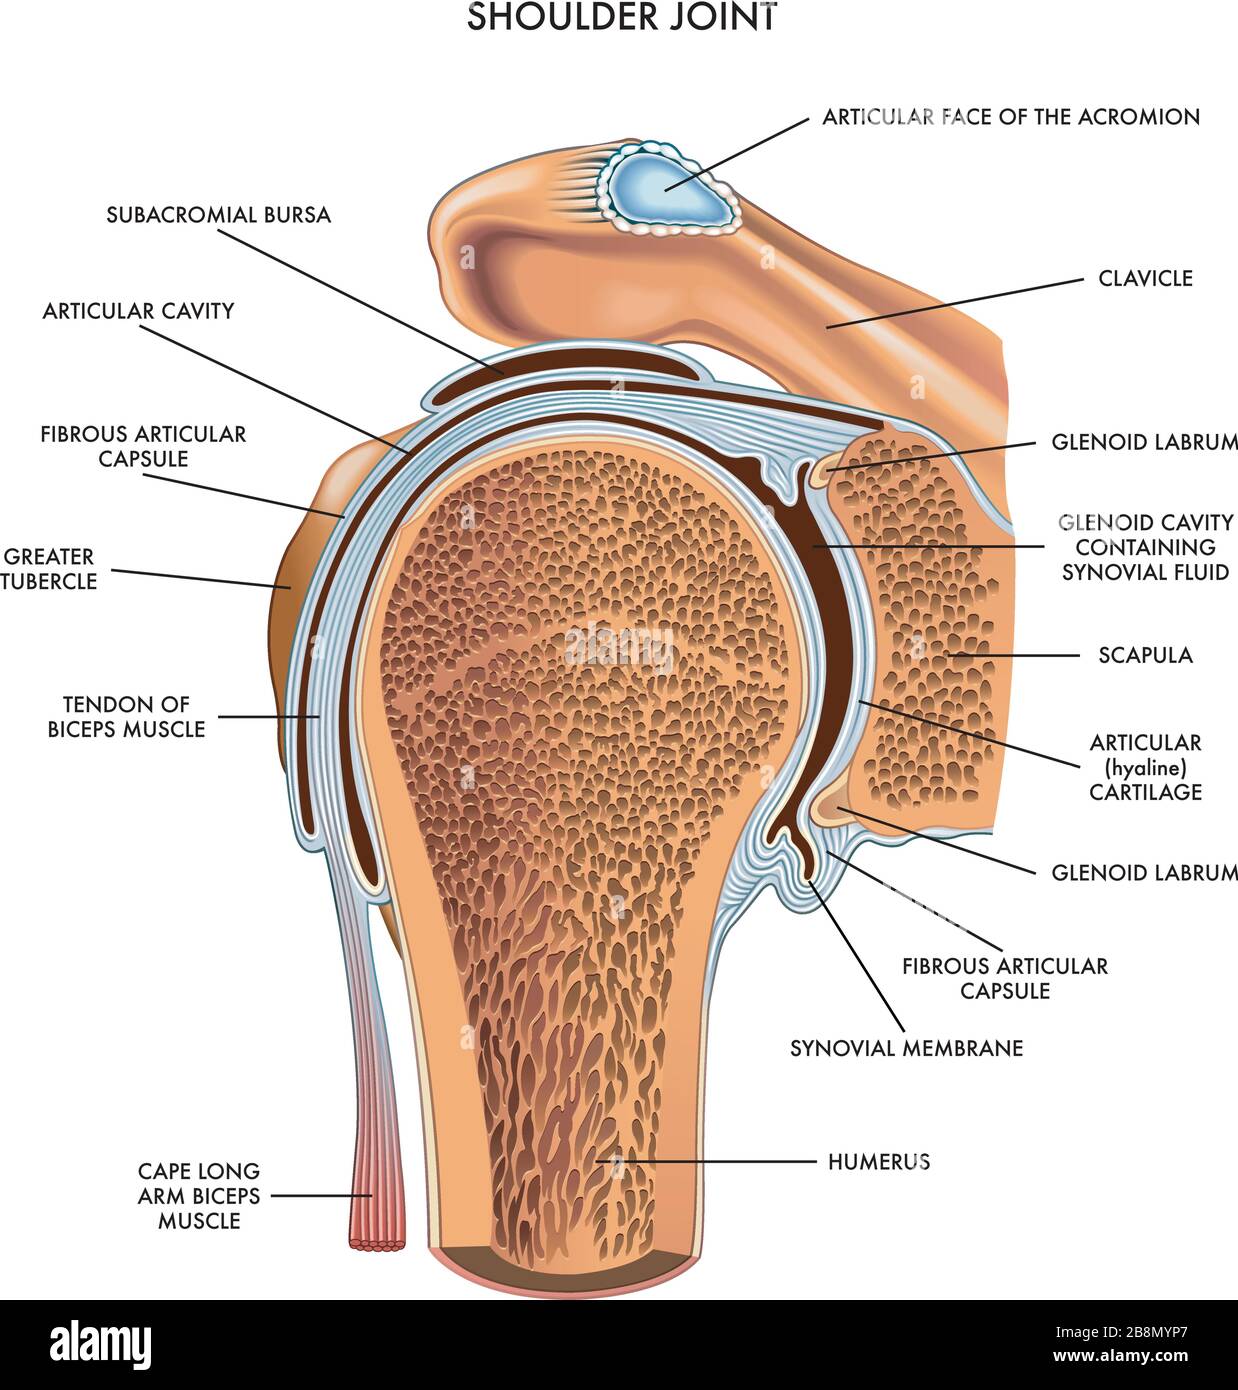 https://c8.alamy.com/comp/2B8MYP7/shoulder-joint-illustrated-and-annotated-with-components-on-white-2B8MYP7.jpg